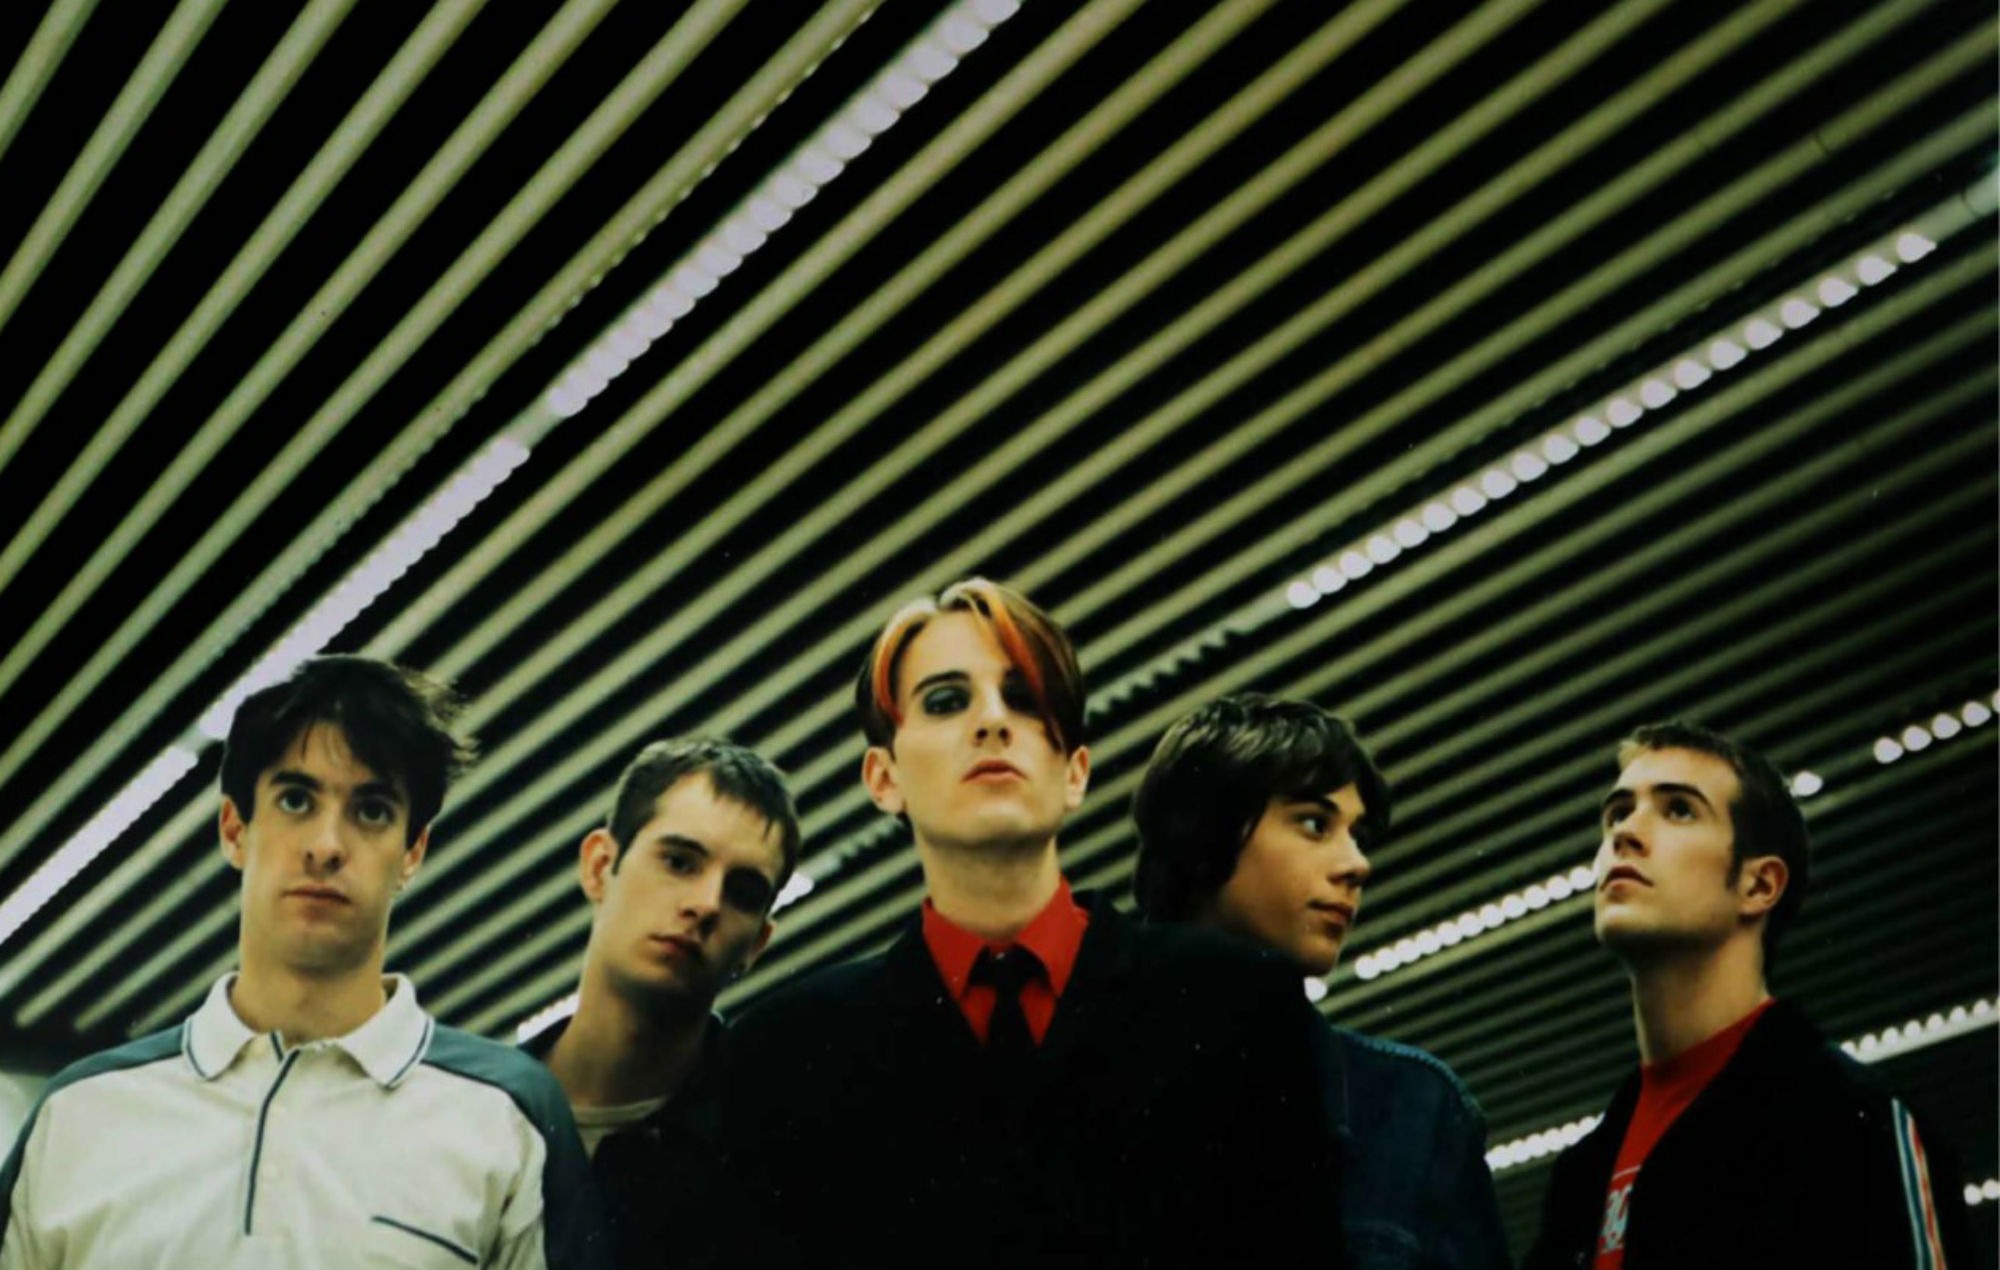 Menswear look back as they share lost single from new box-set: “My proudest achievement? Getting away with it”